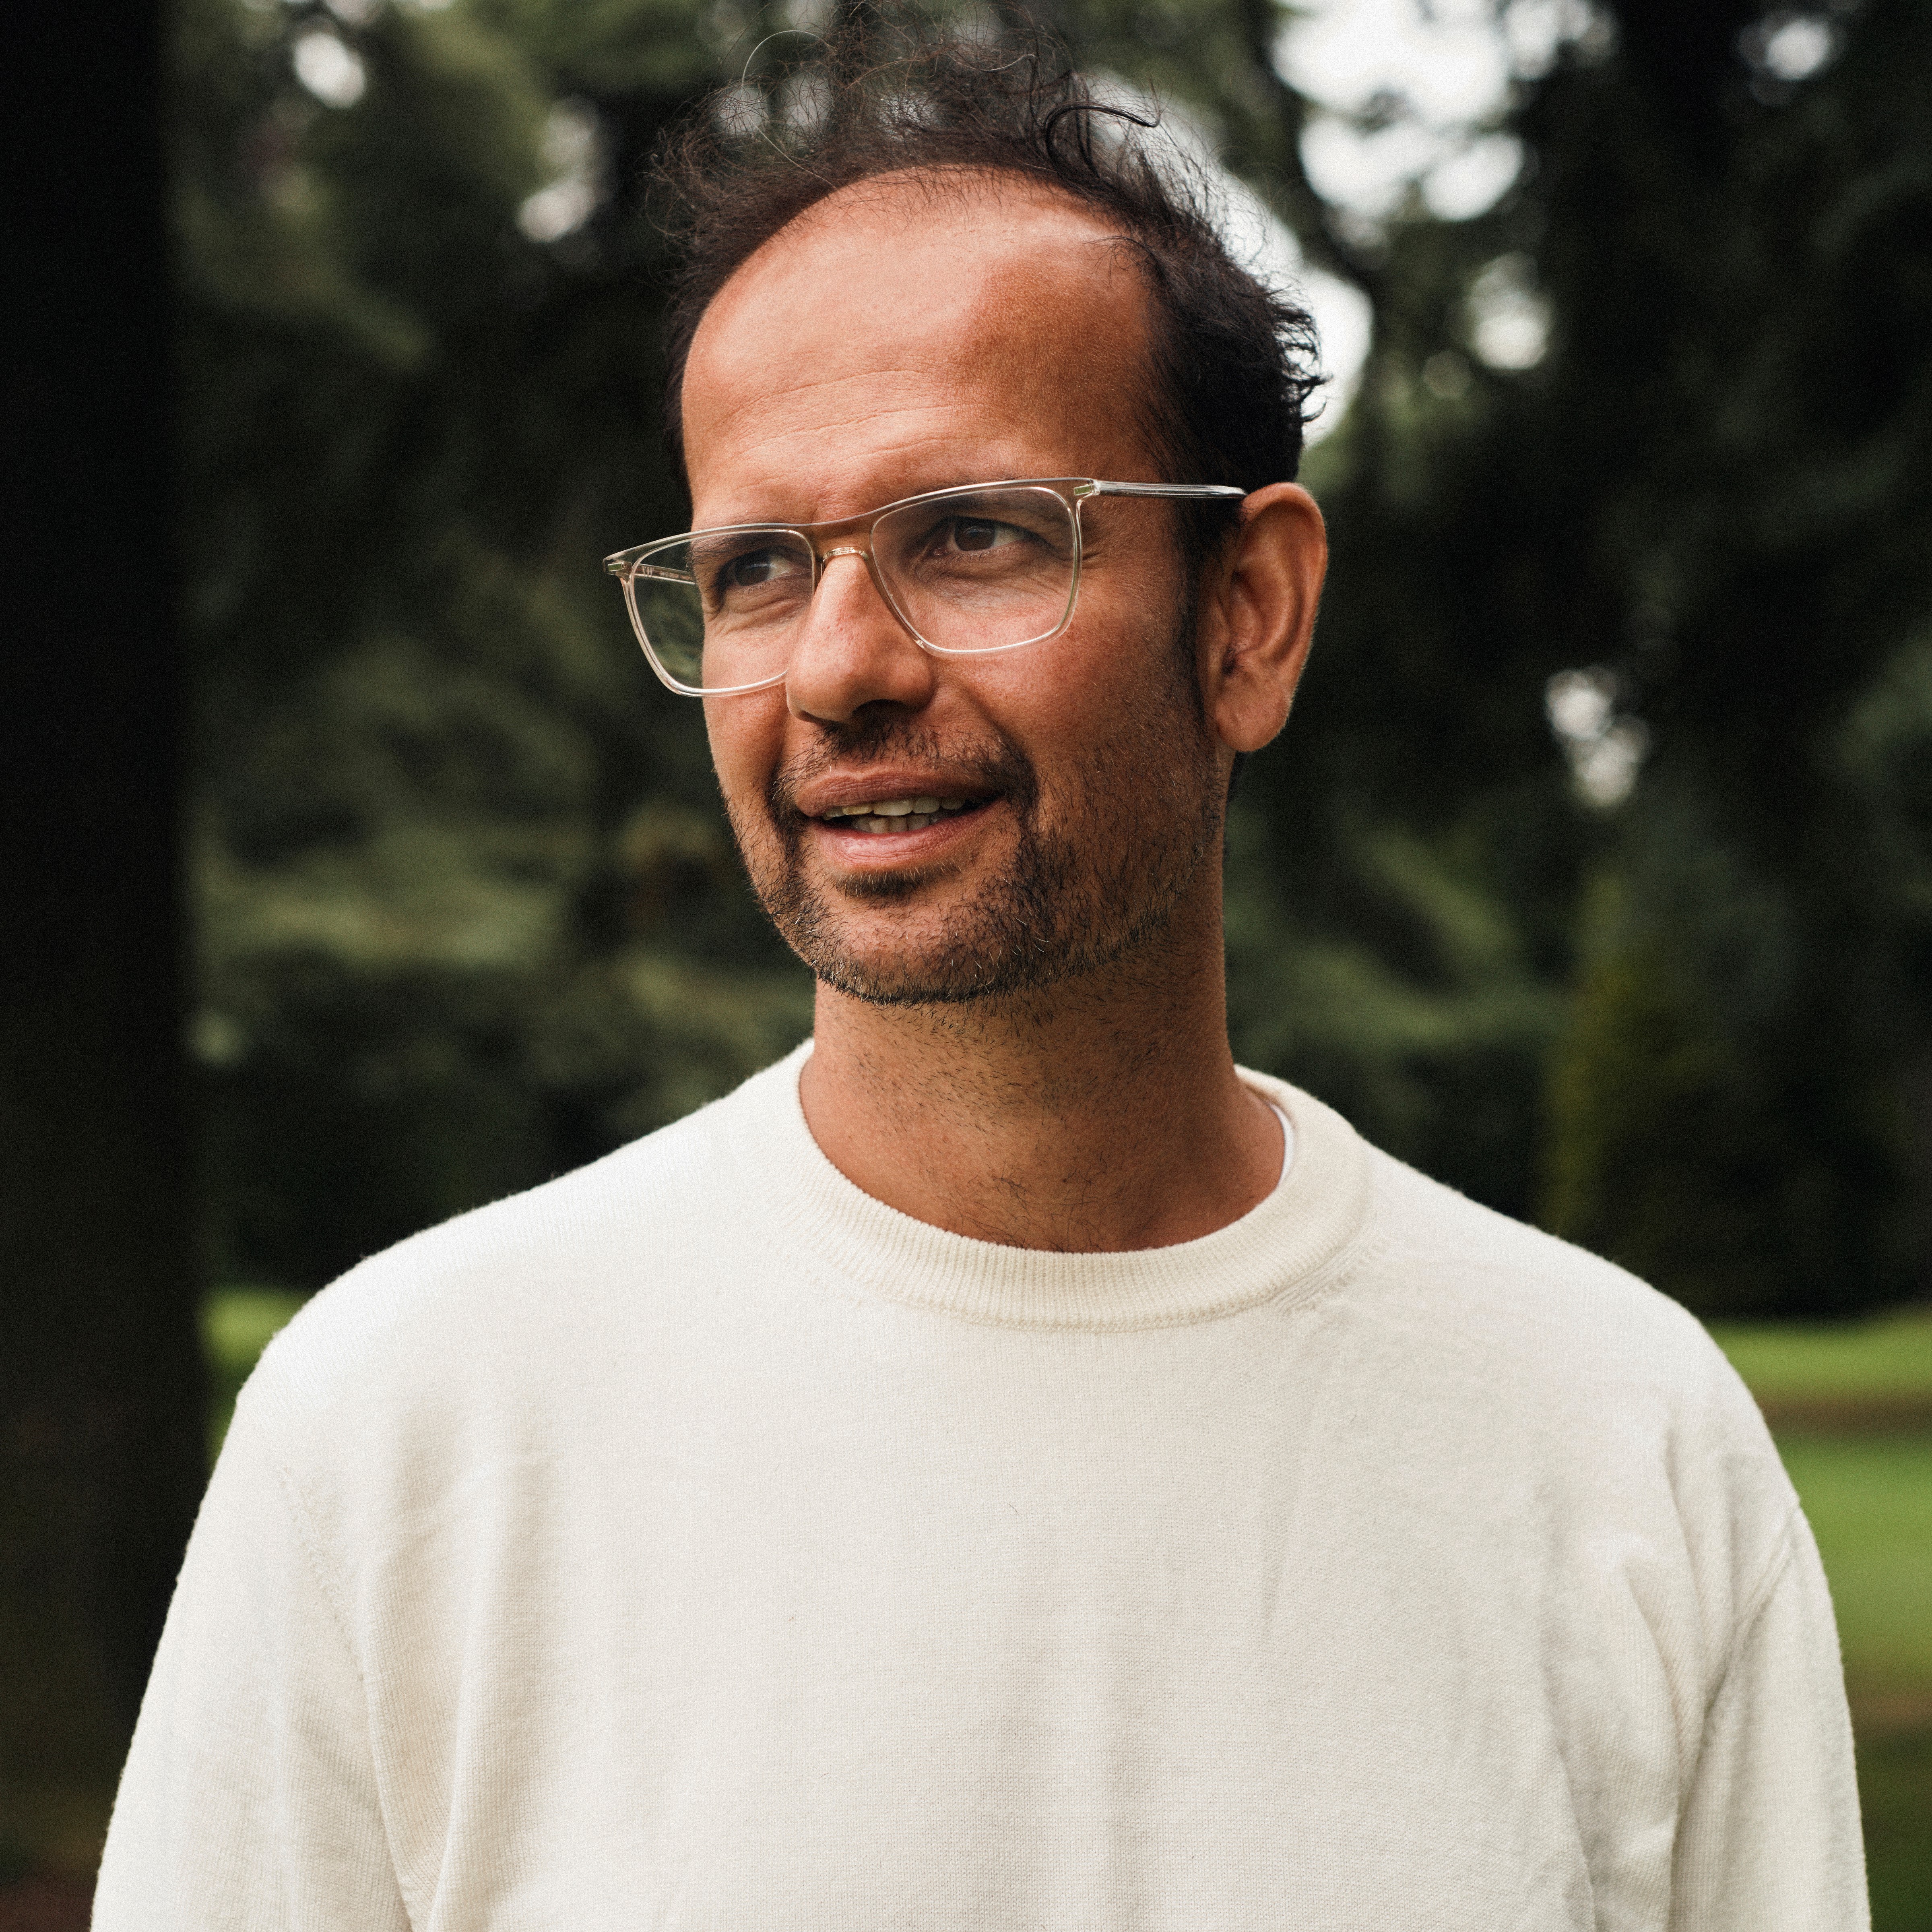 In conversation with Tino Sehgal